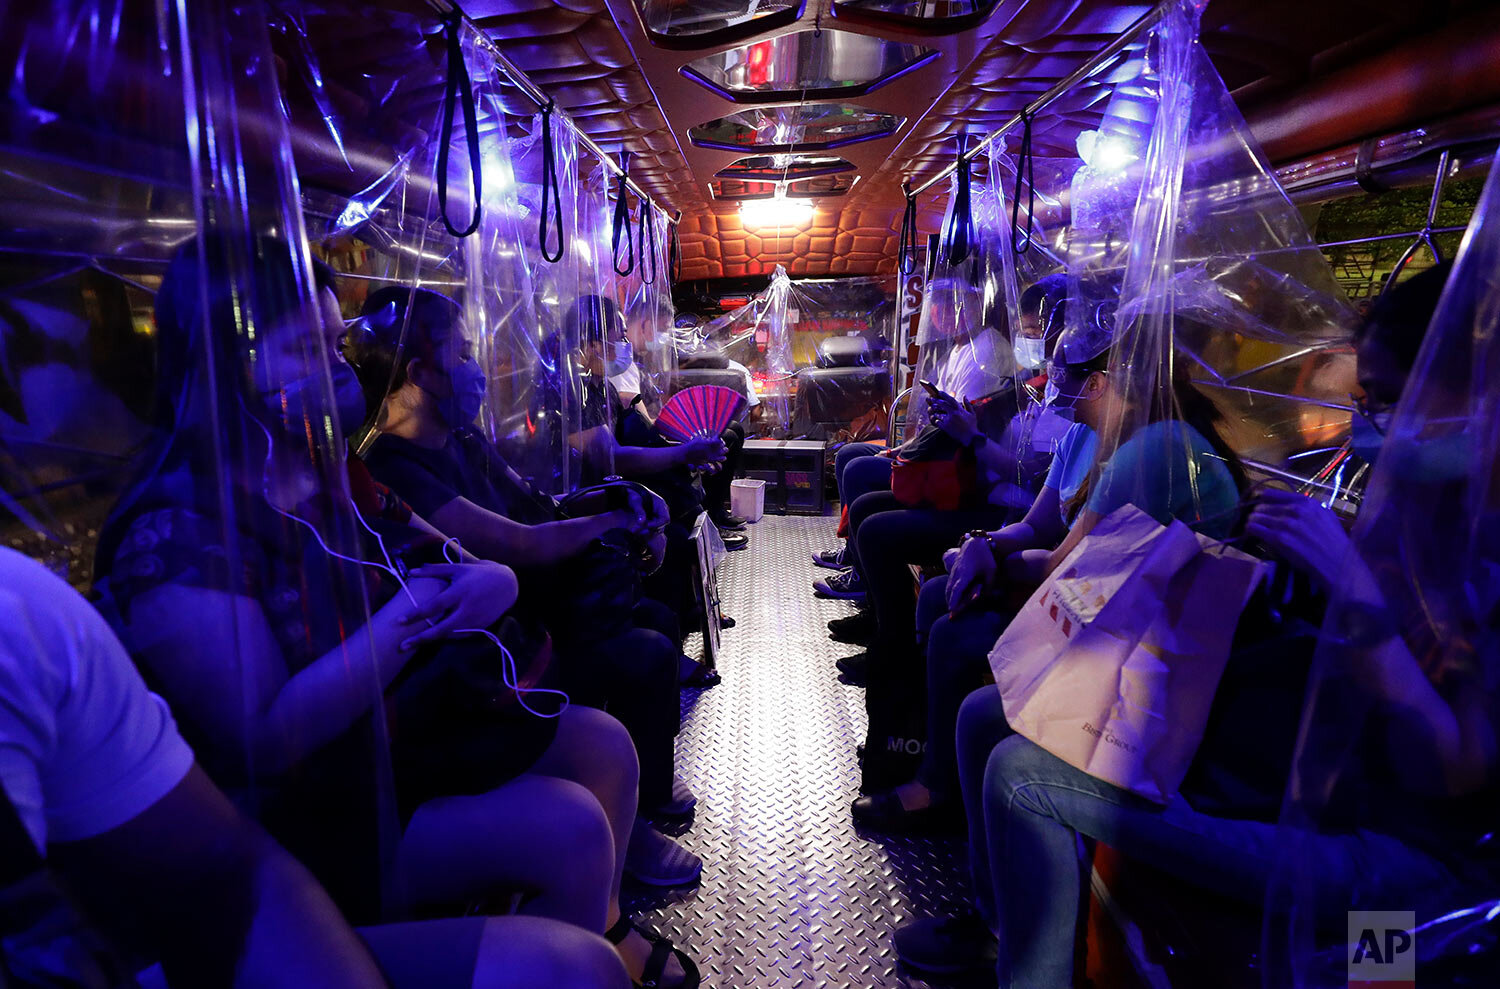  Plastic sheets on a traditional Jeepney bus separate passengers as part of health measures to help prevent the spread of the new coronavirus in metropolitan Manila, Philippines on Friday, July 3, 2020.  (AP Photo/Aaron Favila) 